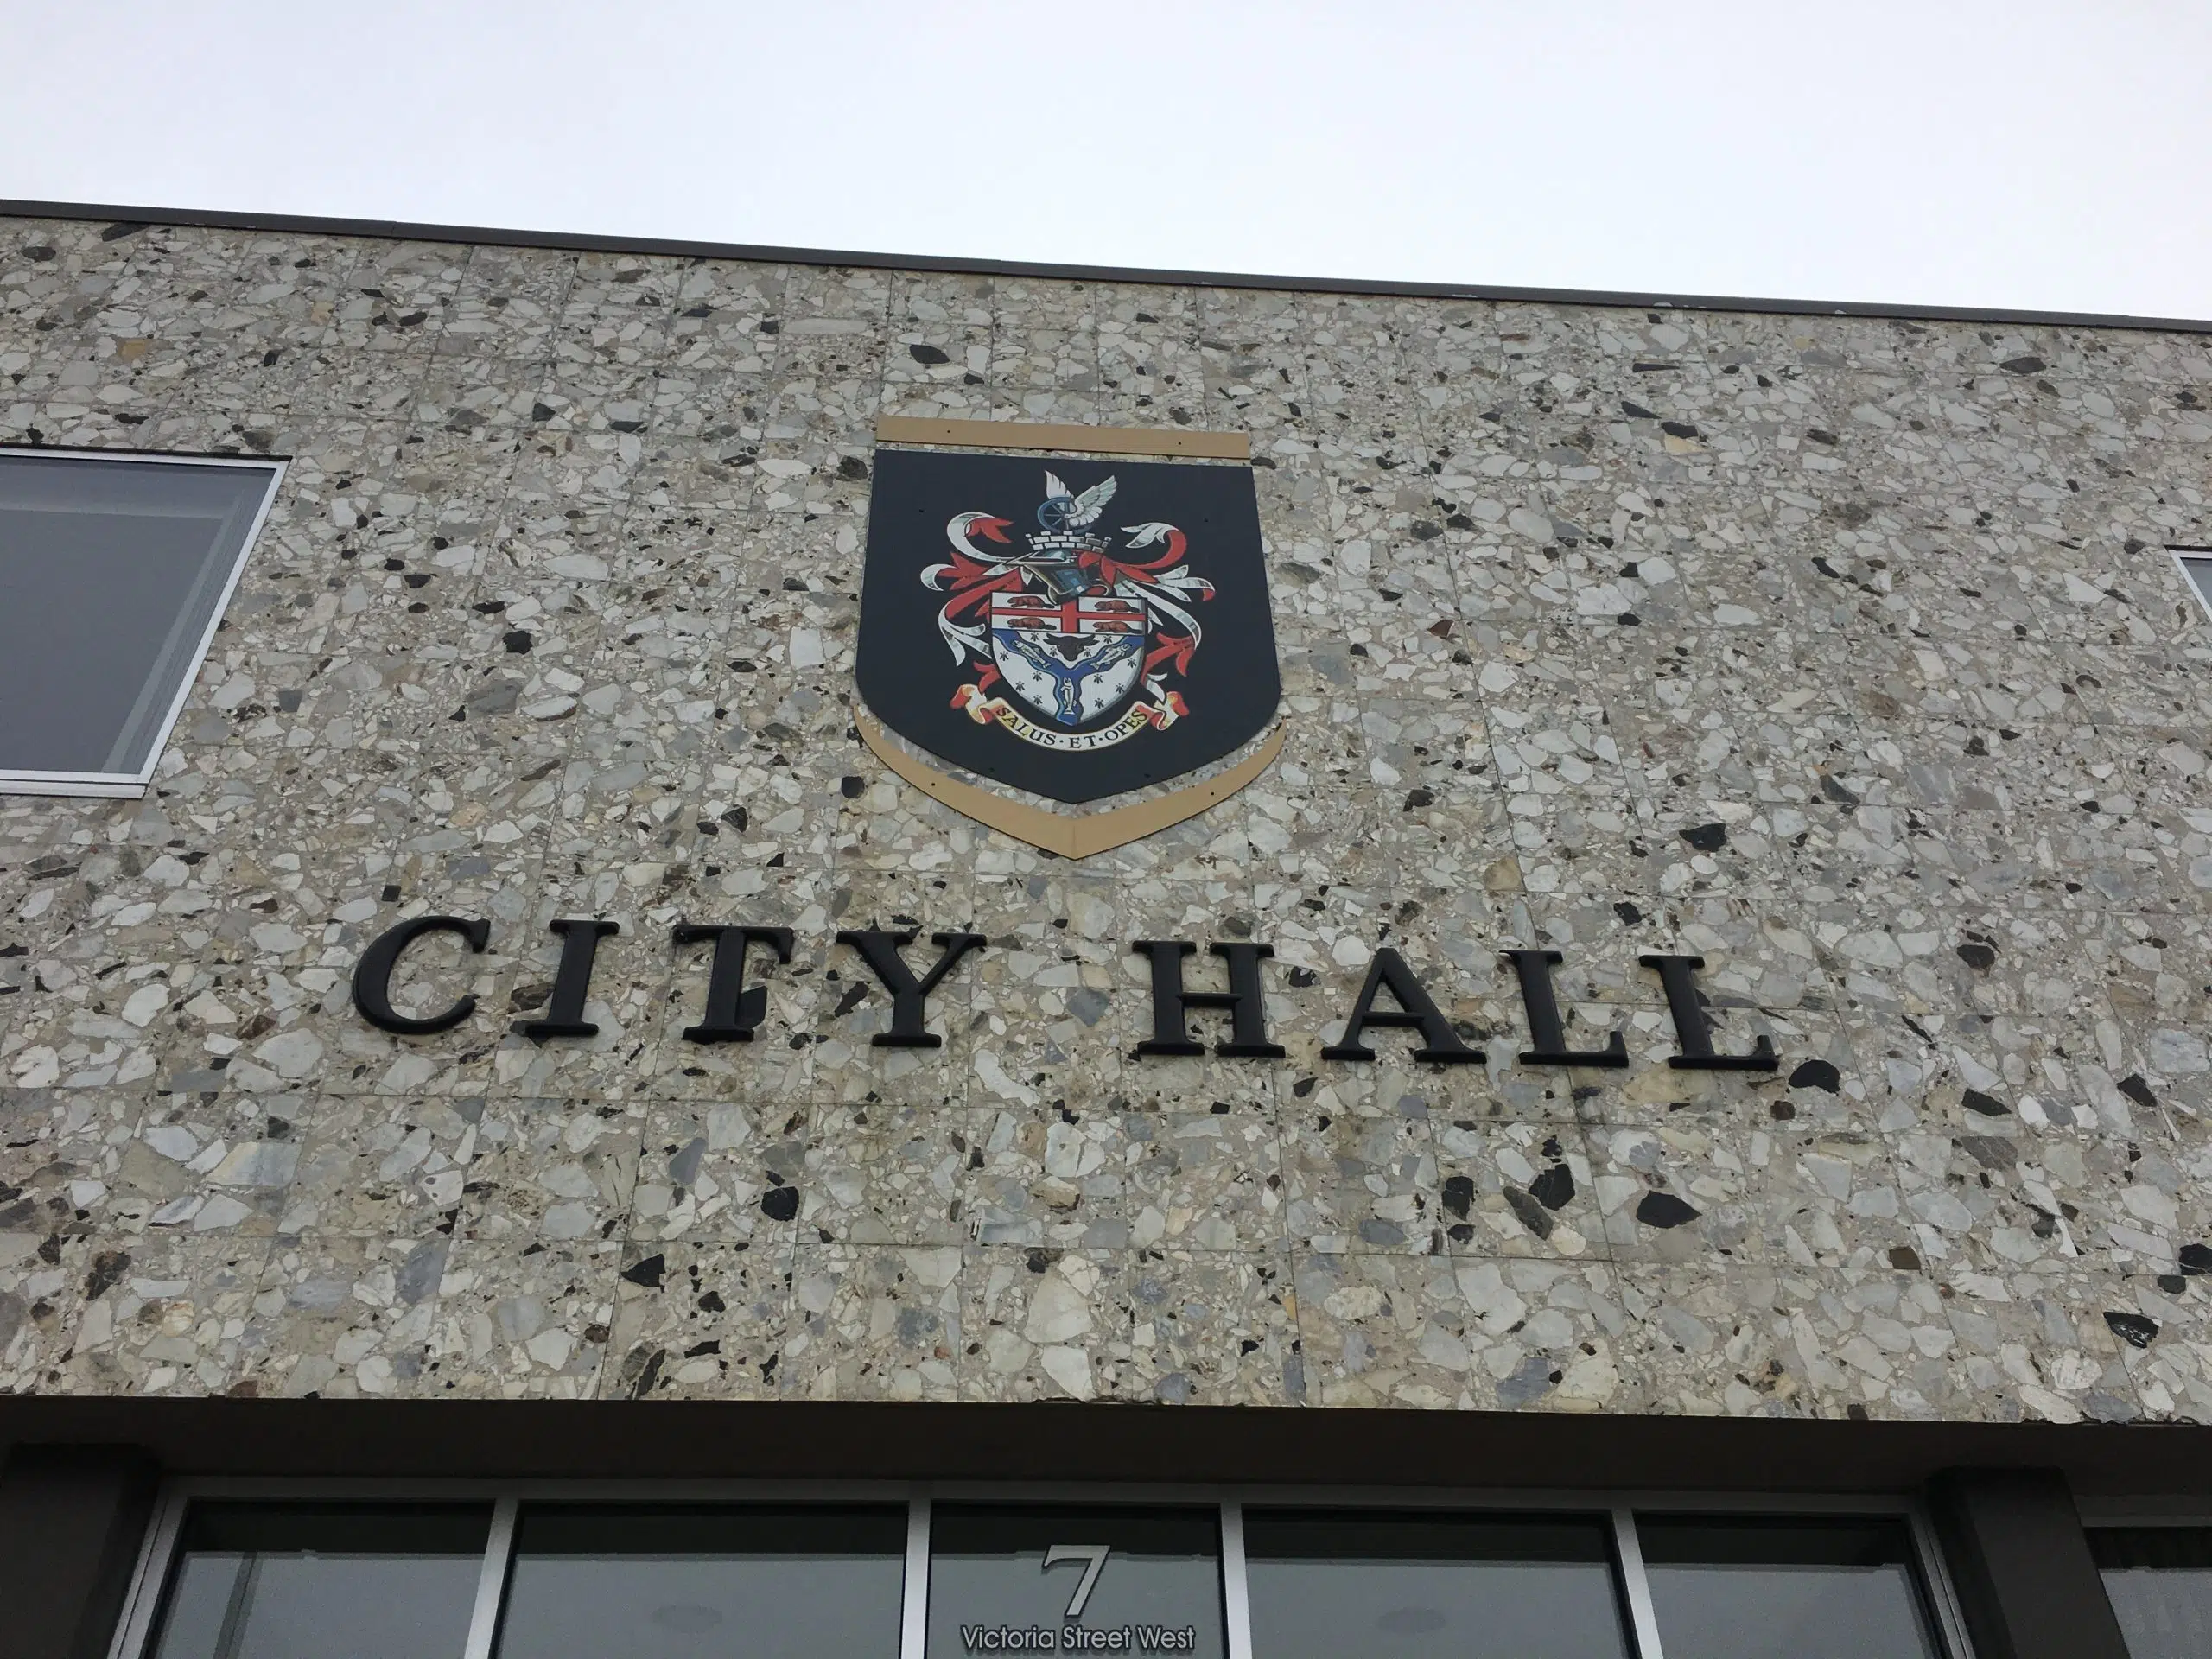 Kamloops council enables staff to ask to borrow money from the province, if needed